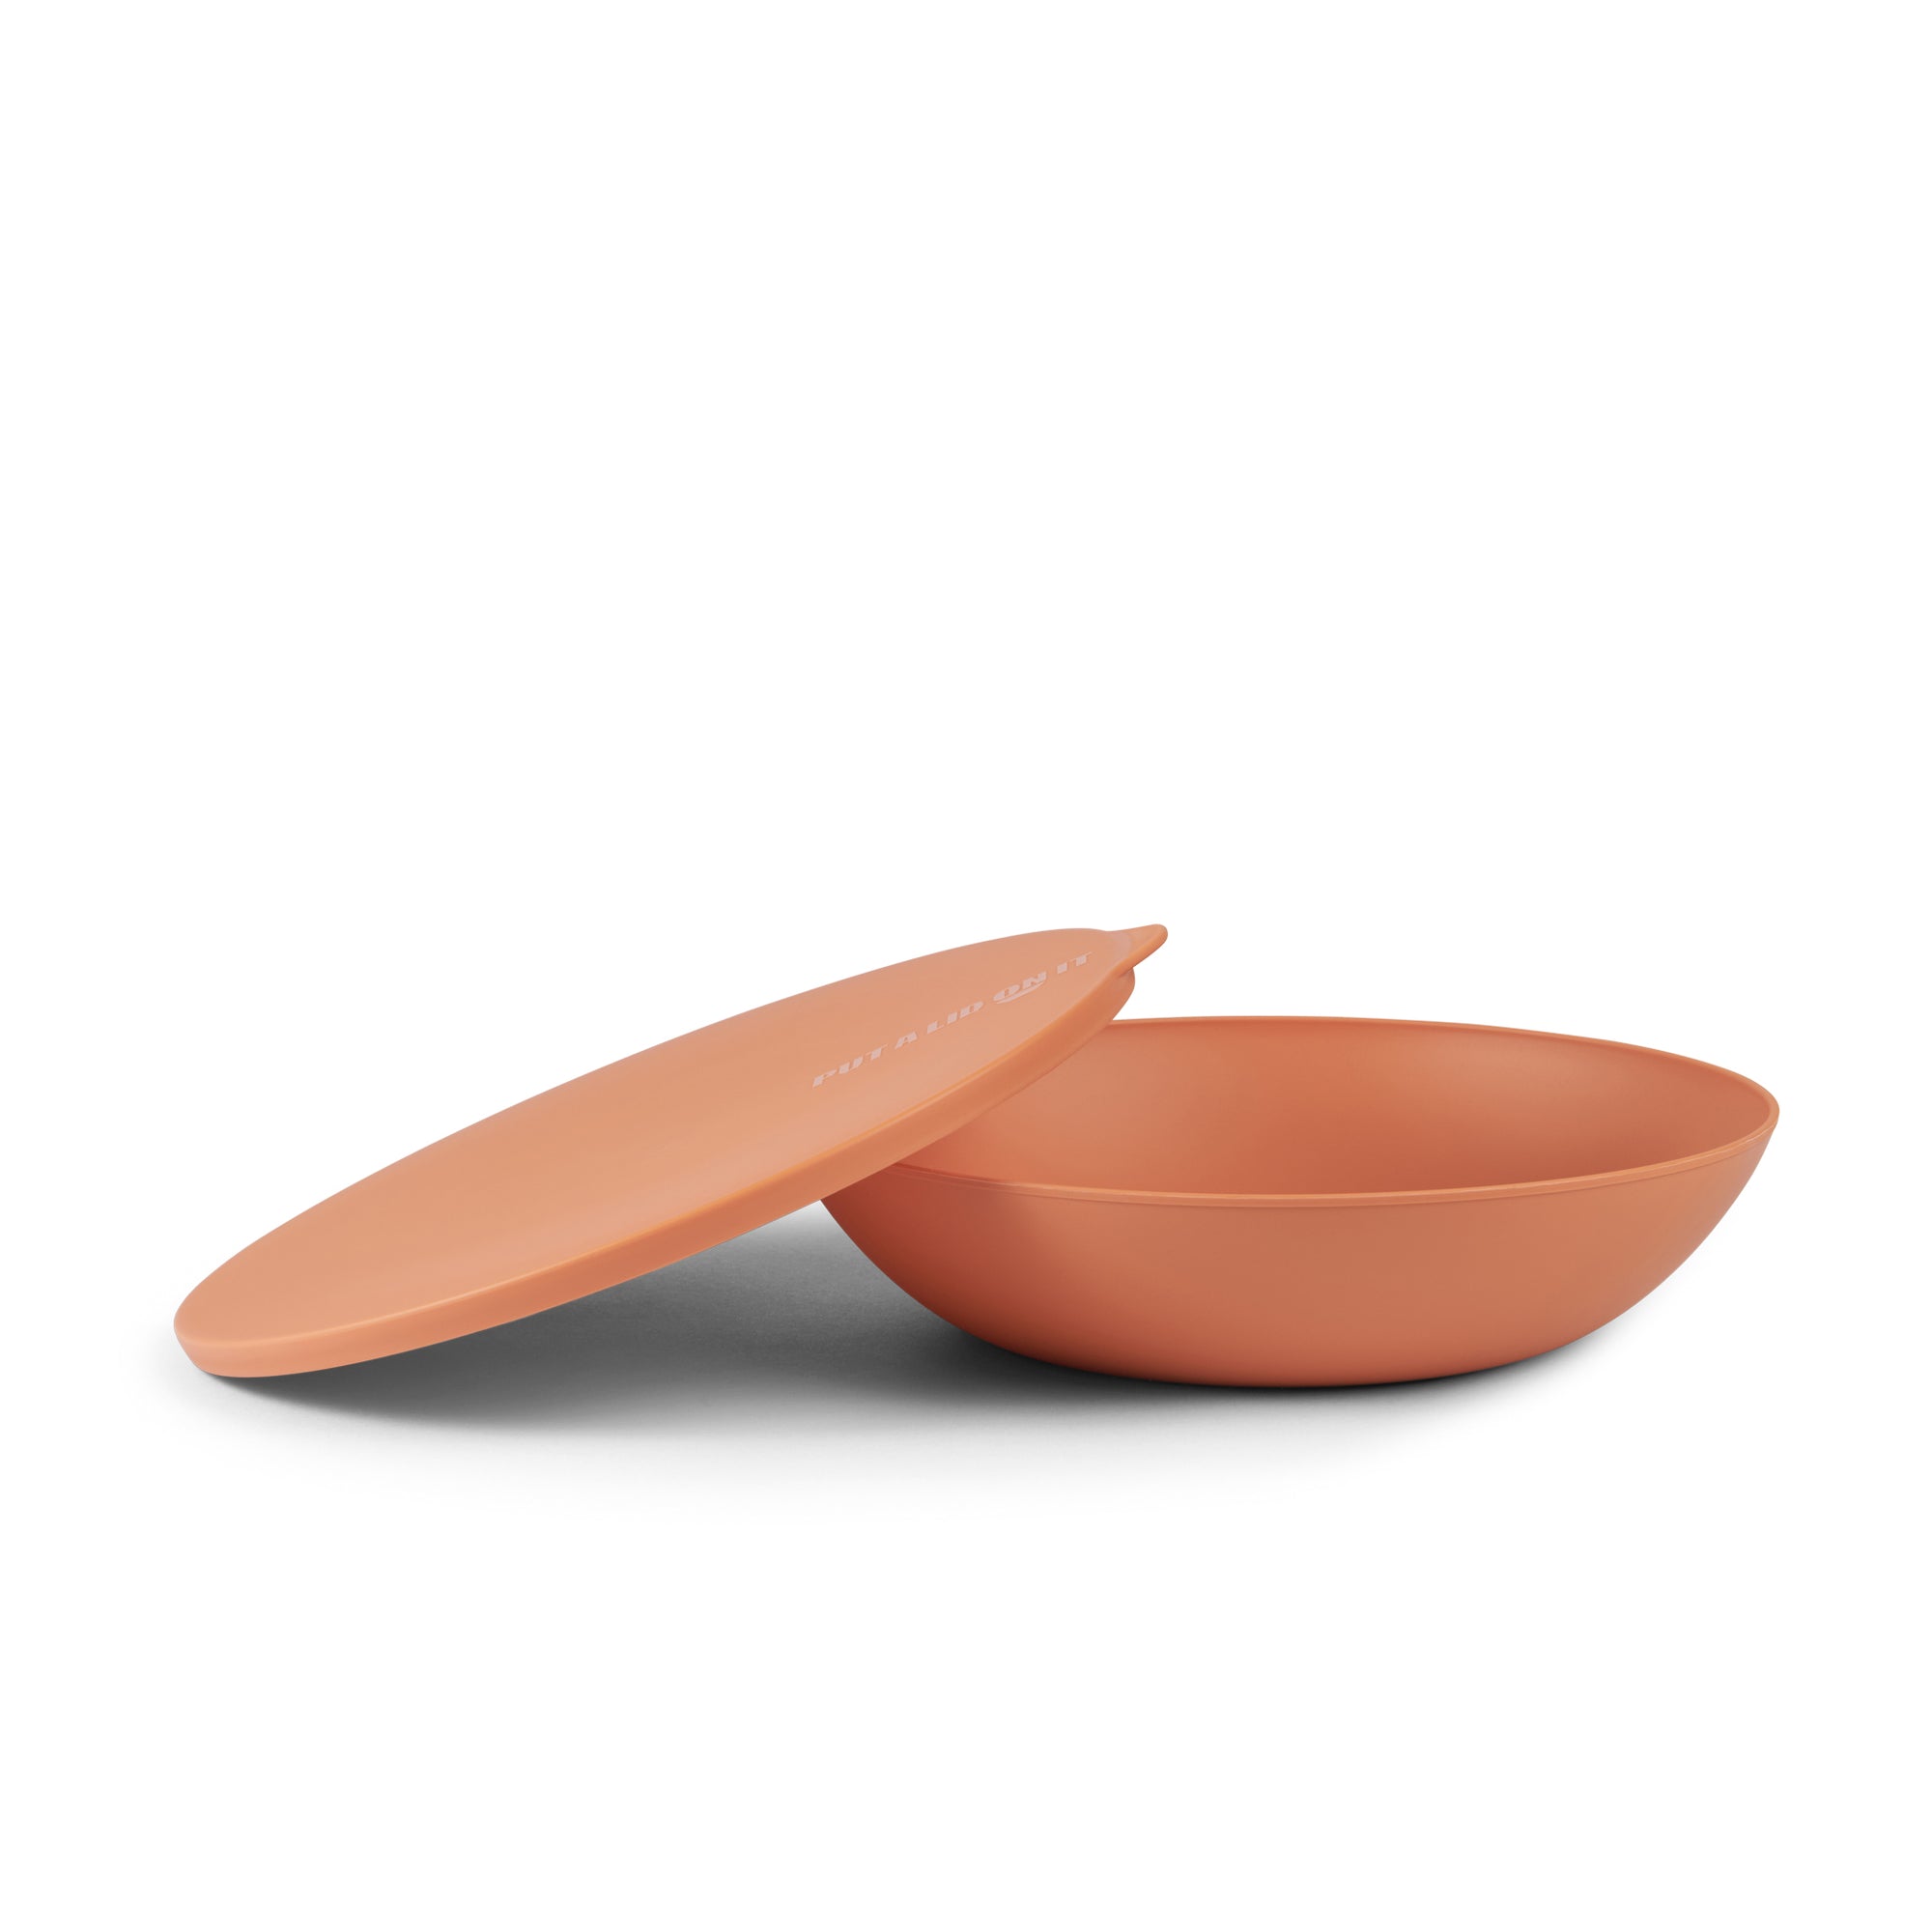 Put a lid on it - Small bowl with a lid - Papaya